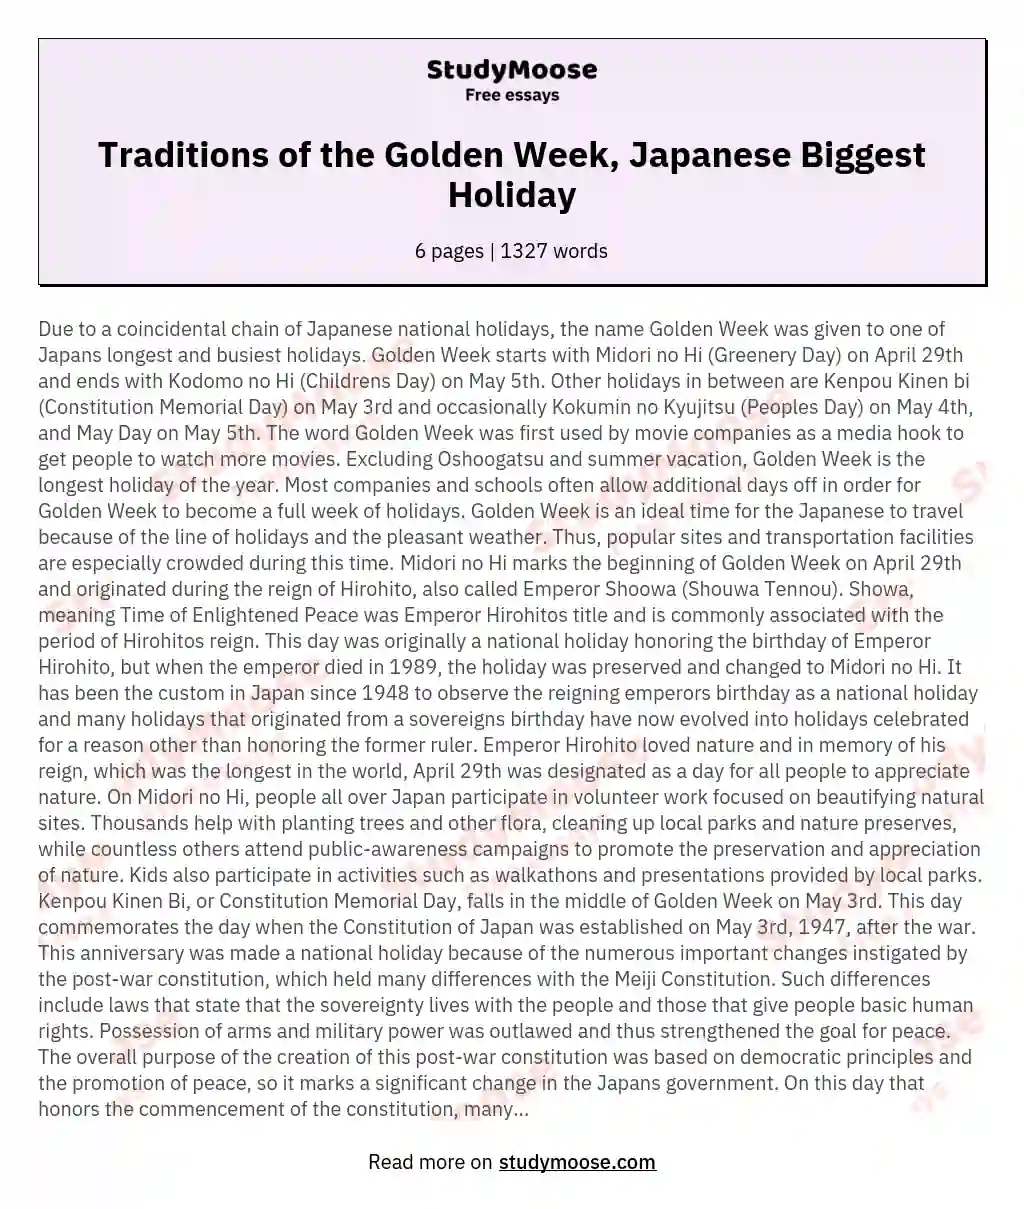 Traditions of the Golden Week, Japanese Biggest Holiday essay